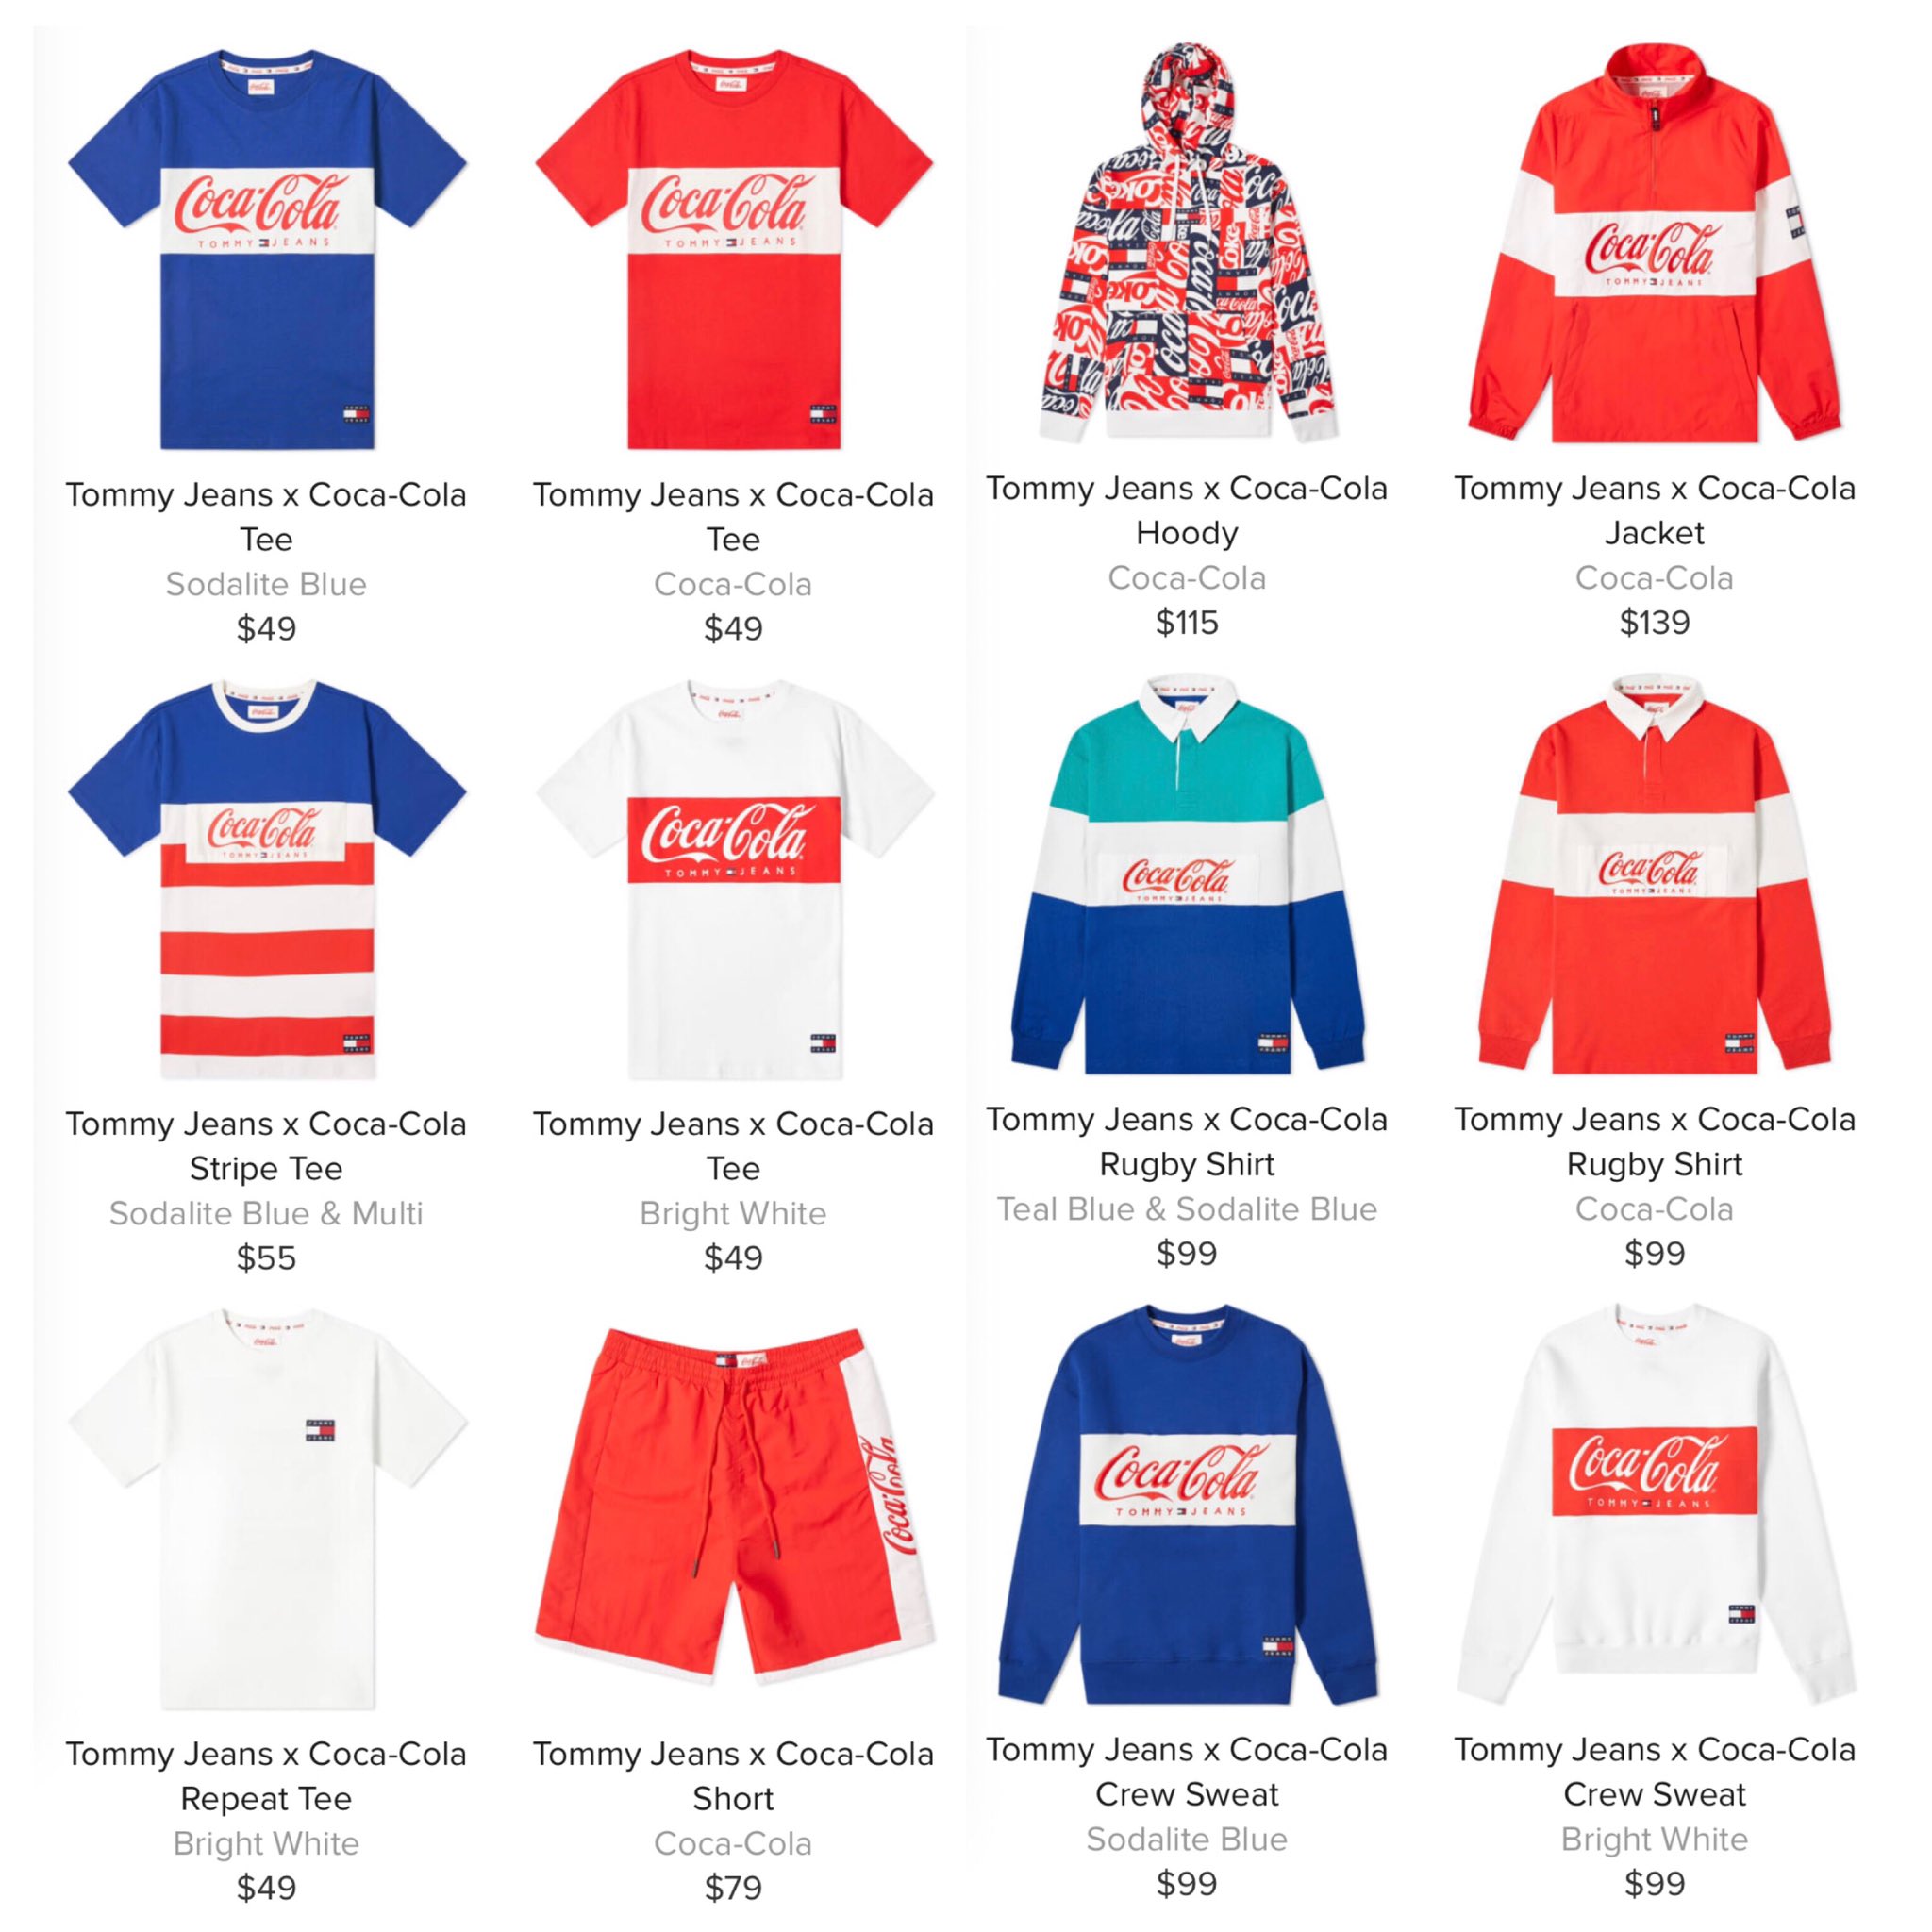 on Twitter: "LIVE in 25 minutes via @endclothing Hilfiger x Coca-Cola apparel collection https://t.co/1us1bpxFhL https://t.co/1us1bpxFhL #AD https://t.co/IDsBLLr1pi" / X